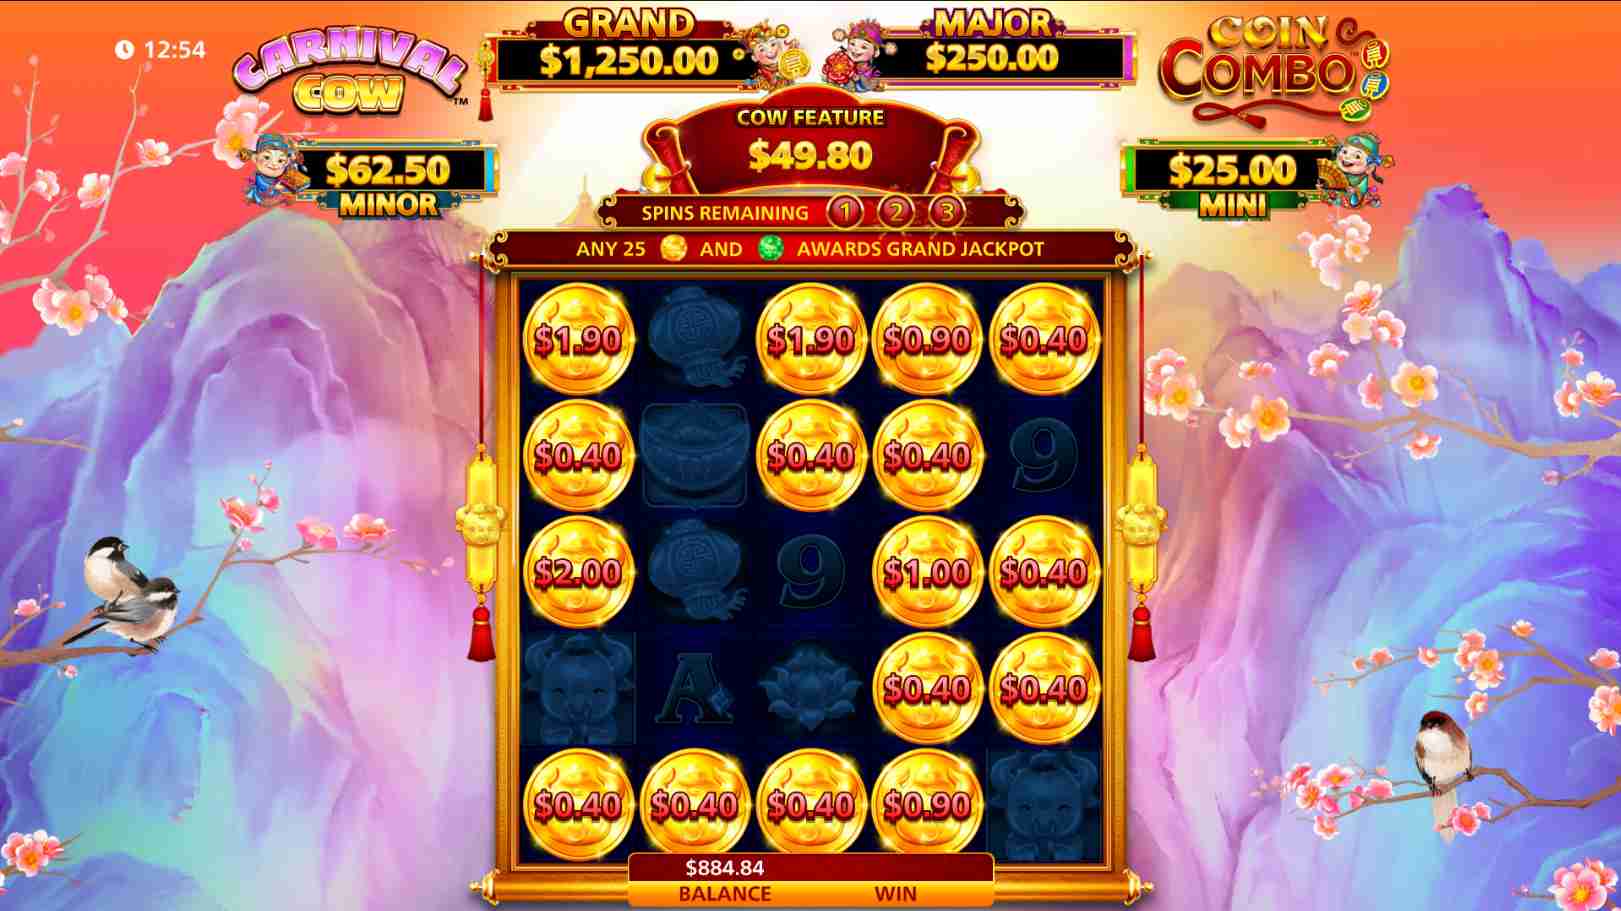 Carnival Cow Coin Combo - Cow Feature